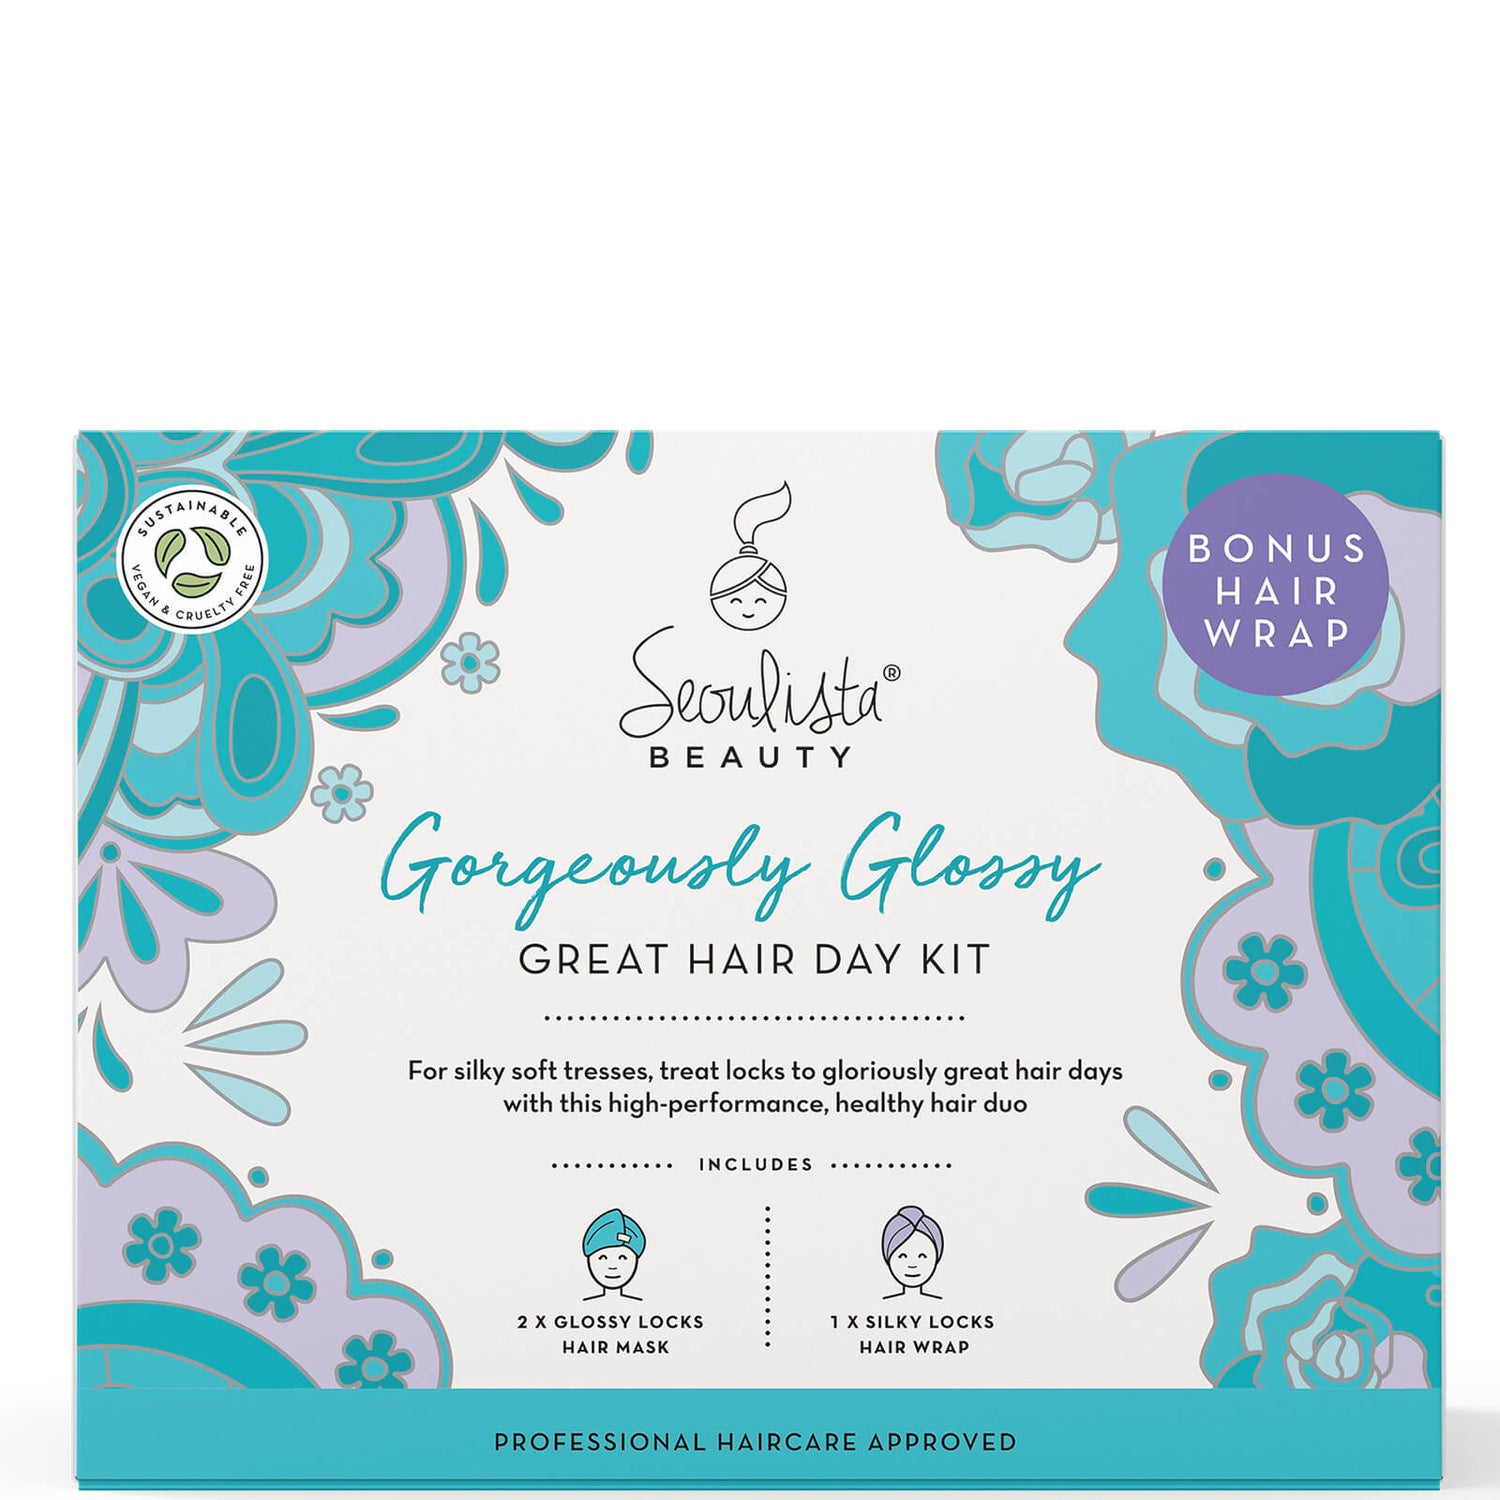 Seoulista Beauty Gorgeously Glossy Great Hair Day Kit (Kit pour le jour des grands cheveux)